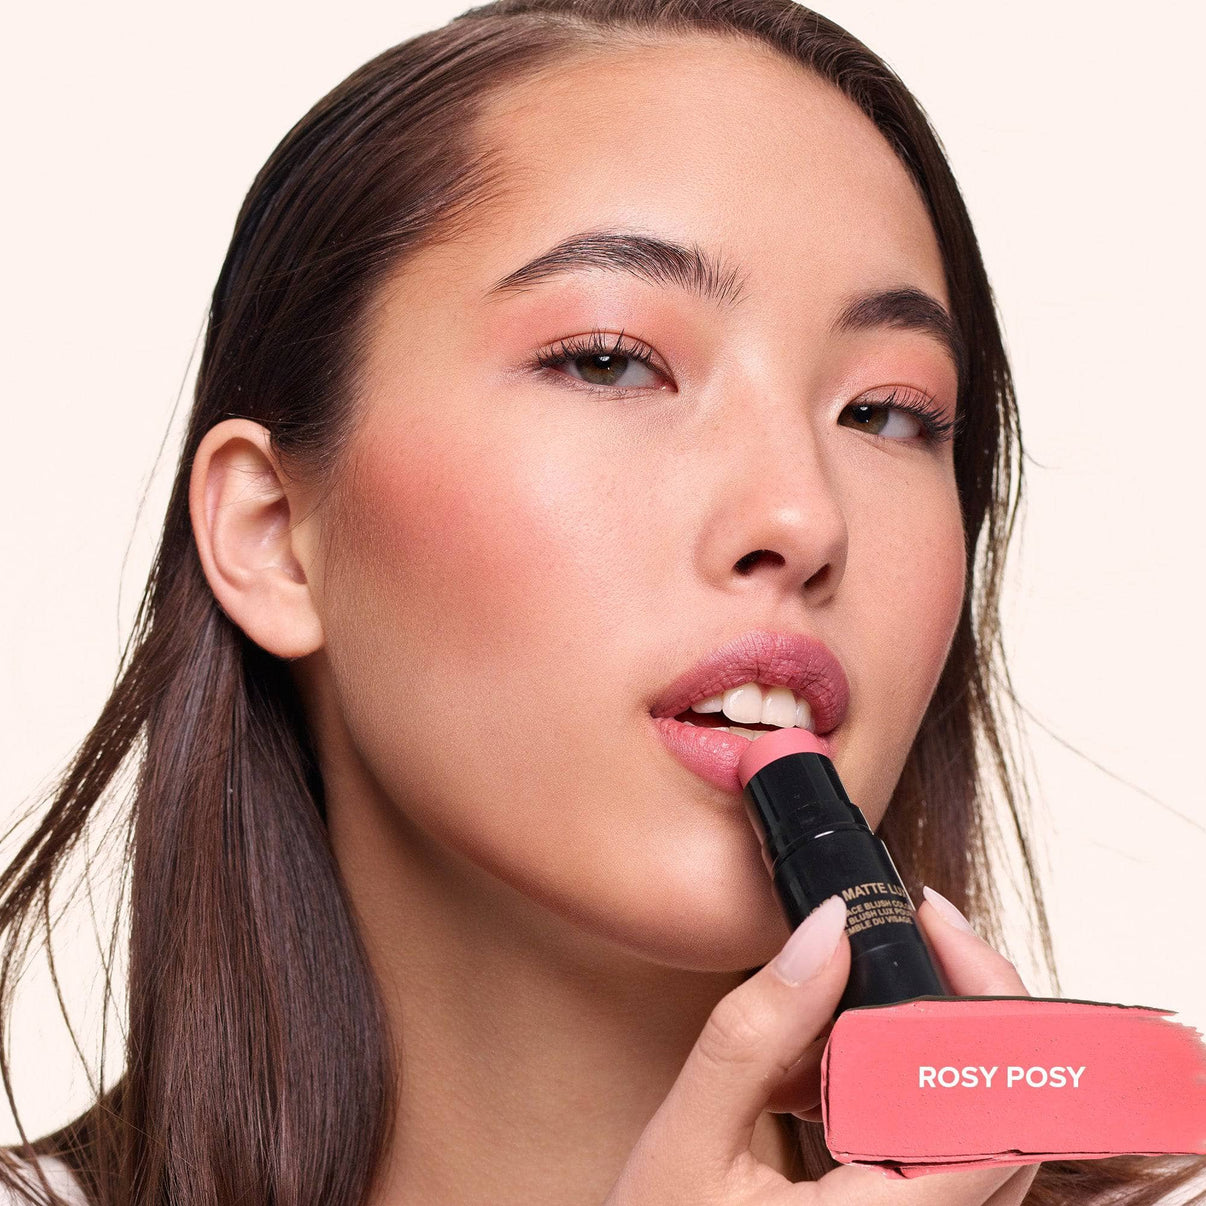 Young woman applying Nudies Matte Lux in shade Rosy Posy on her lips - 7